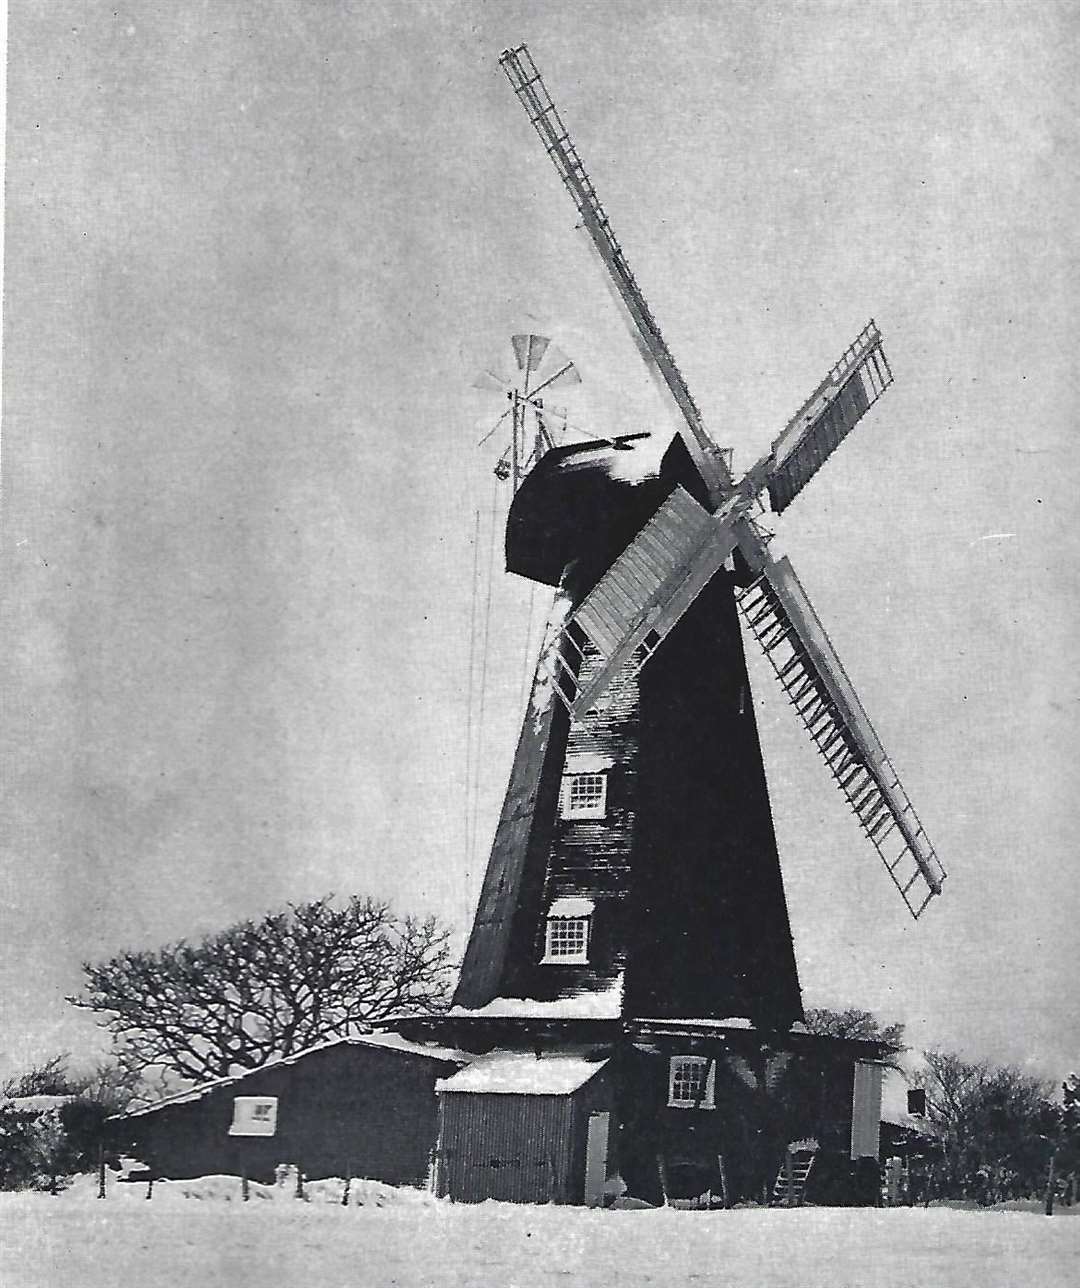 The Black Mill of Barham, pictured in 1963